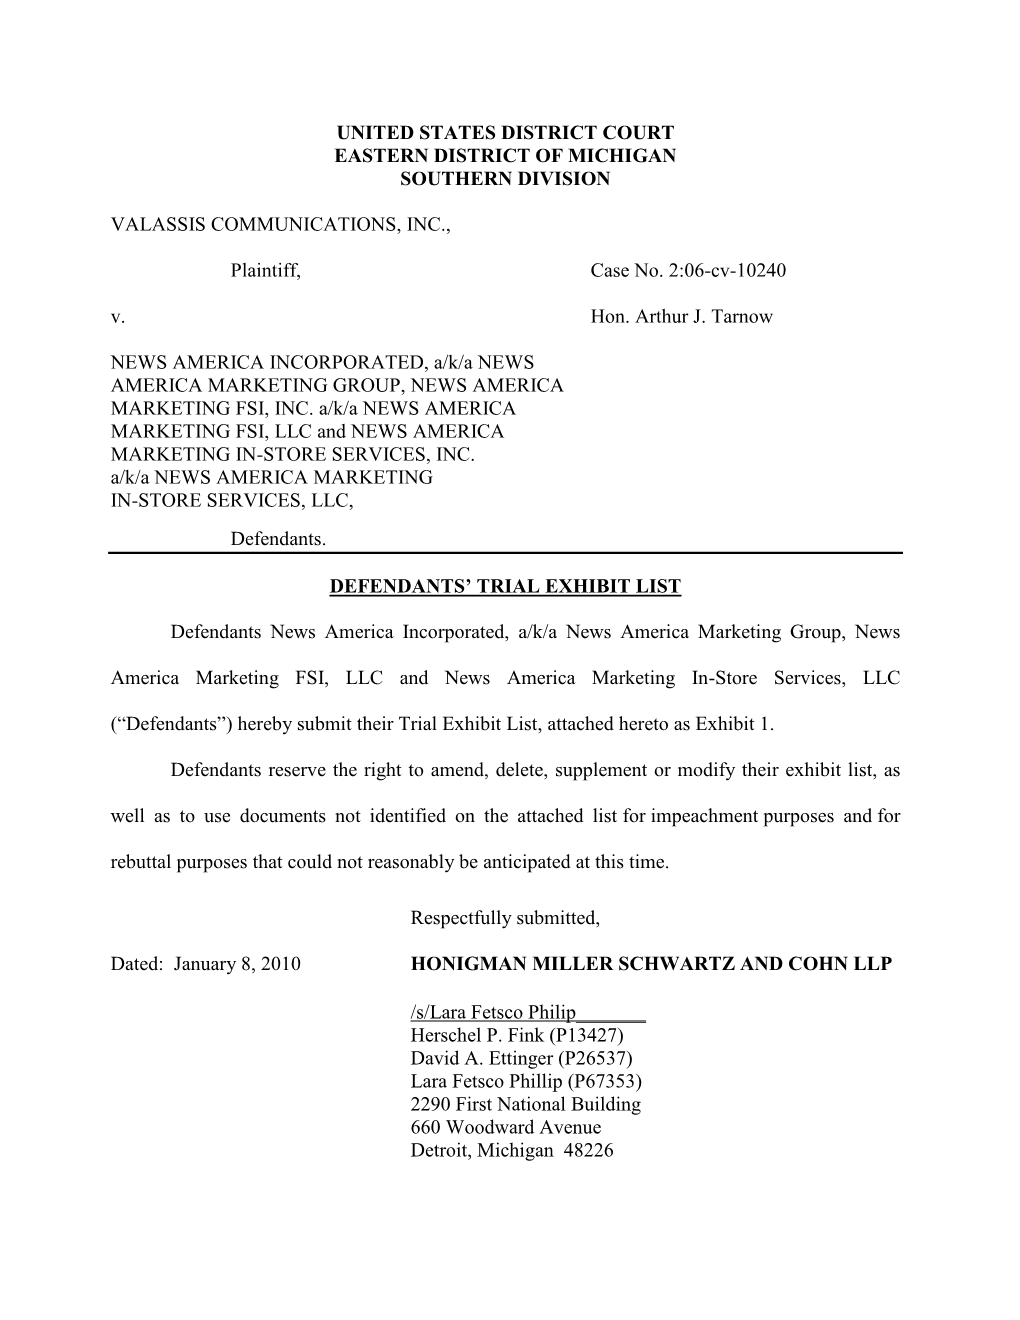 UNITED STATES DISTRICT COURT EASTERN DISTRICT of MICHIGAN SOUTHERN DIVISION VALASSIS COMMUNICATIONS, INC., Plaintiff, Case No. 2